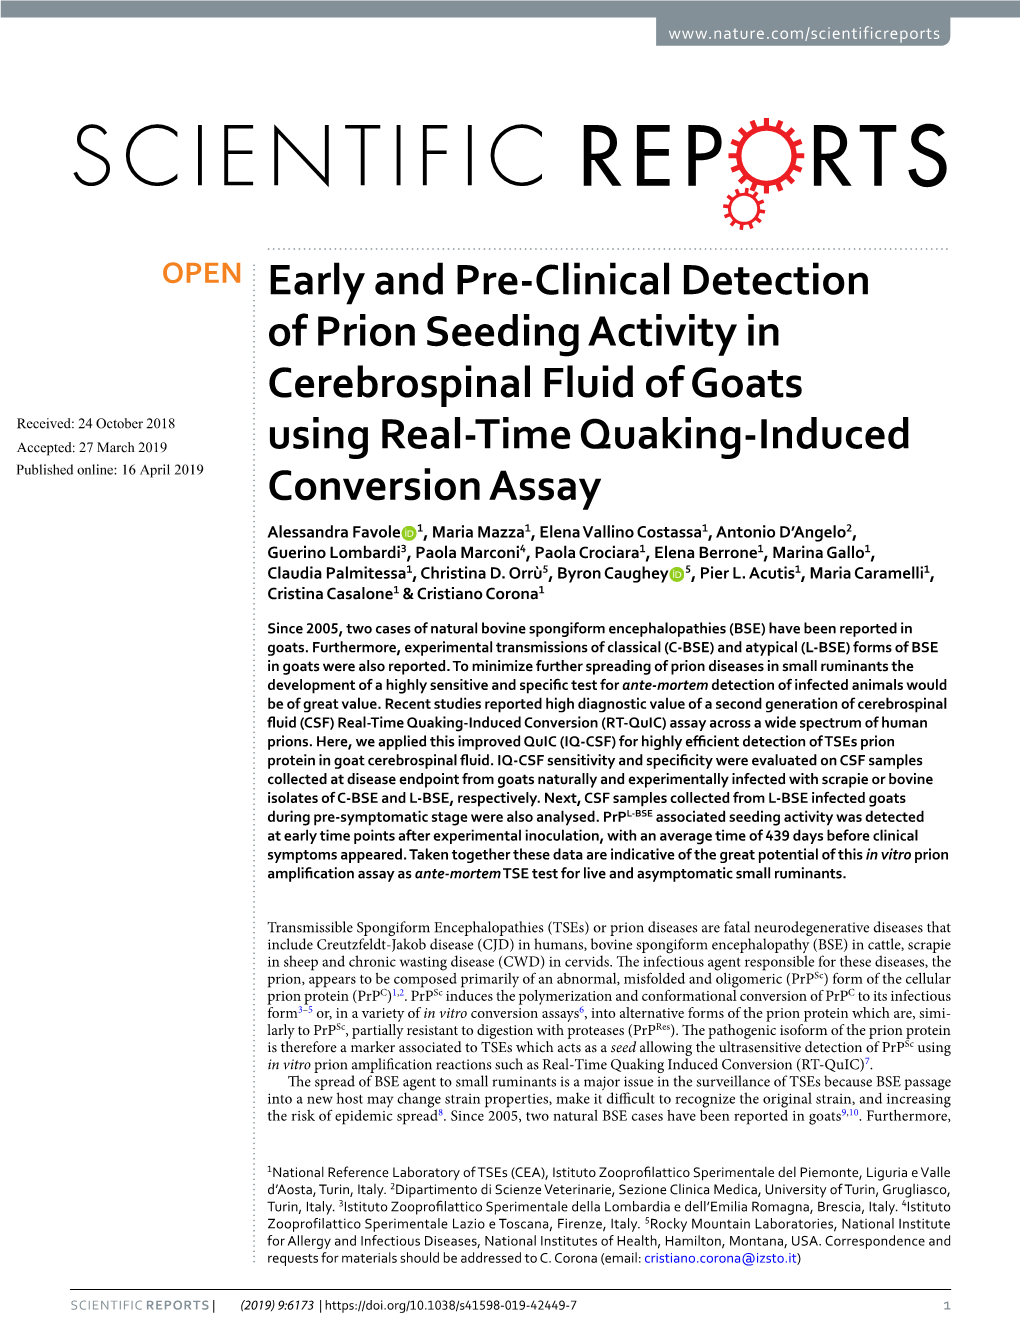 Early and Pre-Clinical Detection of Prion Seeding Activity In